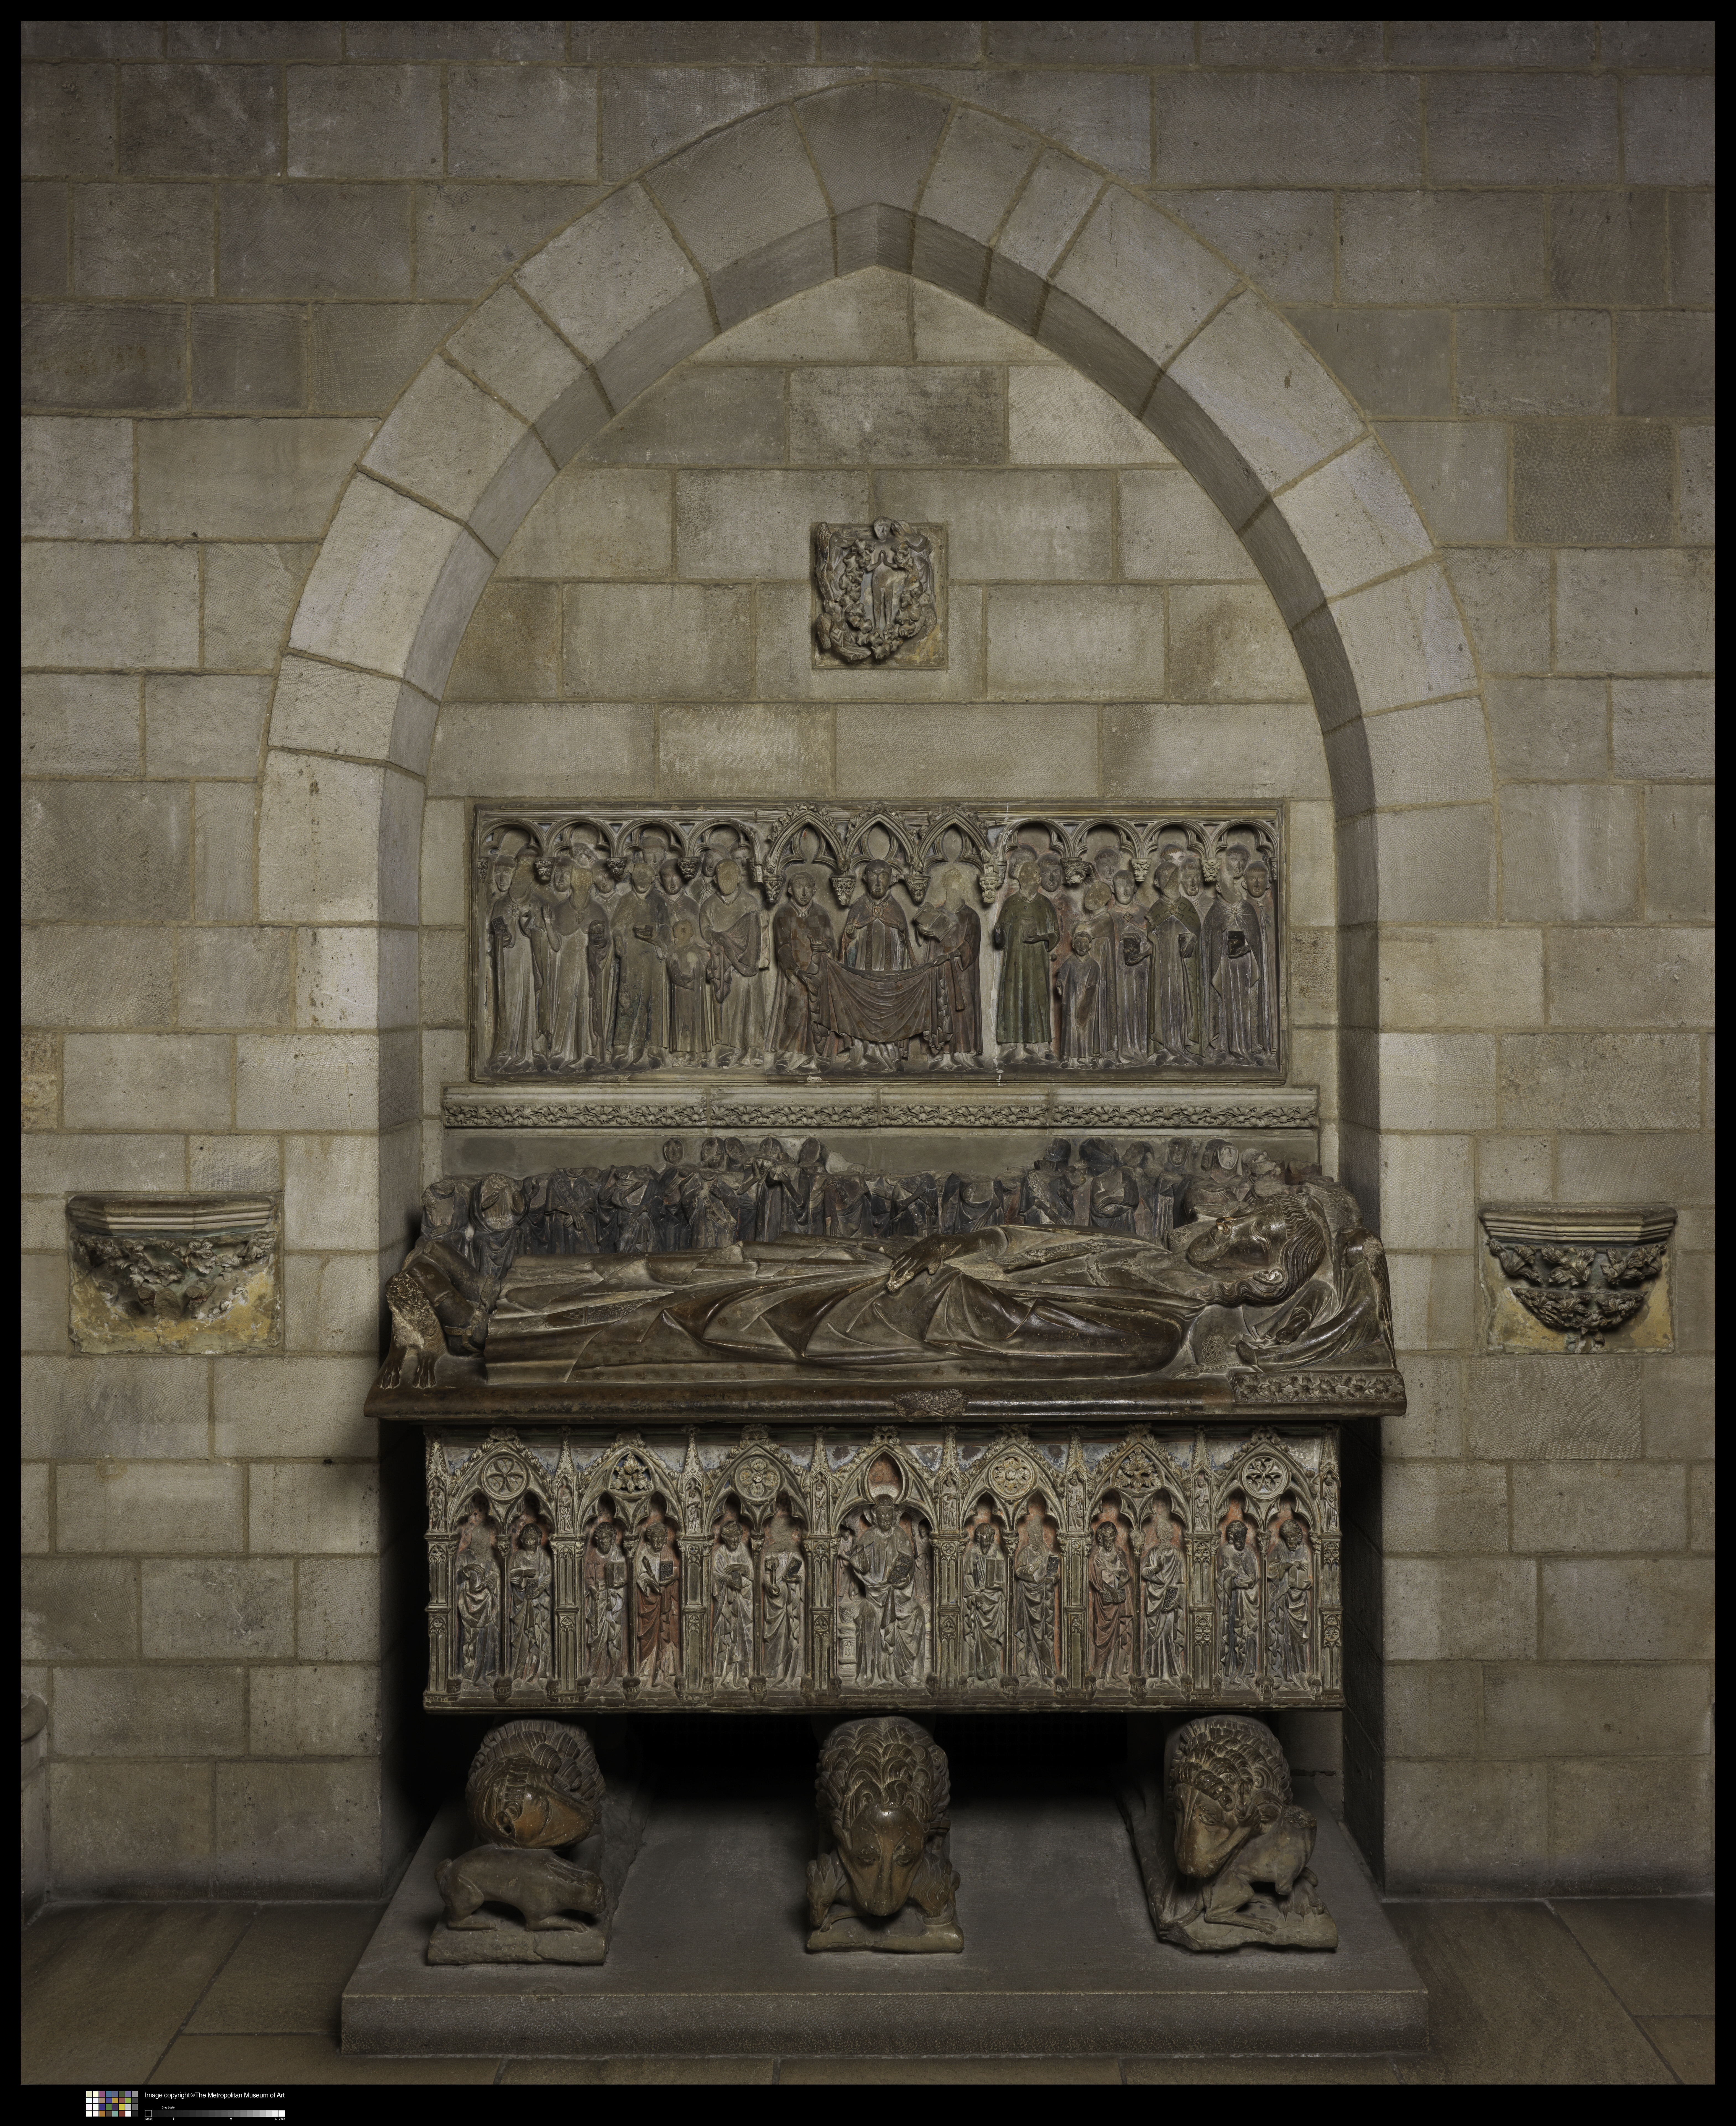 Tomb sculpture of a recumbent man holding a sword celebrated by rows of mourners behind him, over a sarcophagus with figures of Christ and apostles. The ensemble is carved in limestone with polychromy.